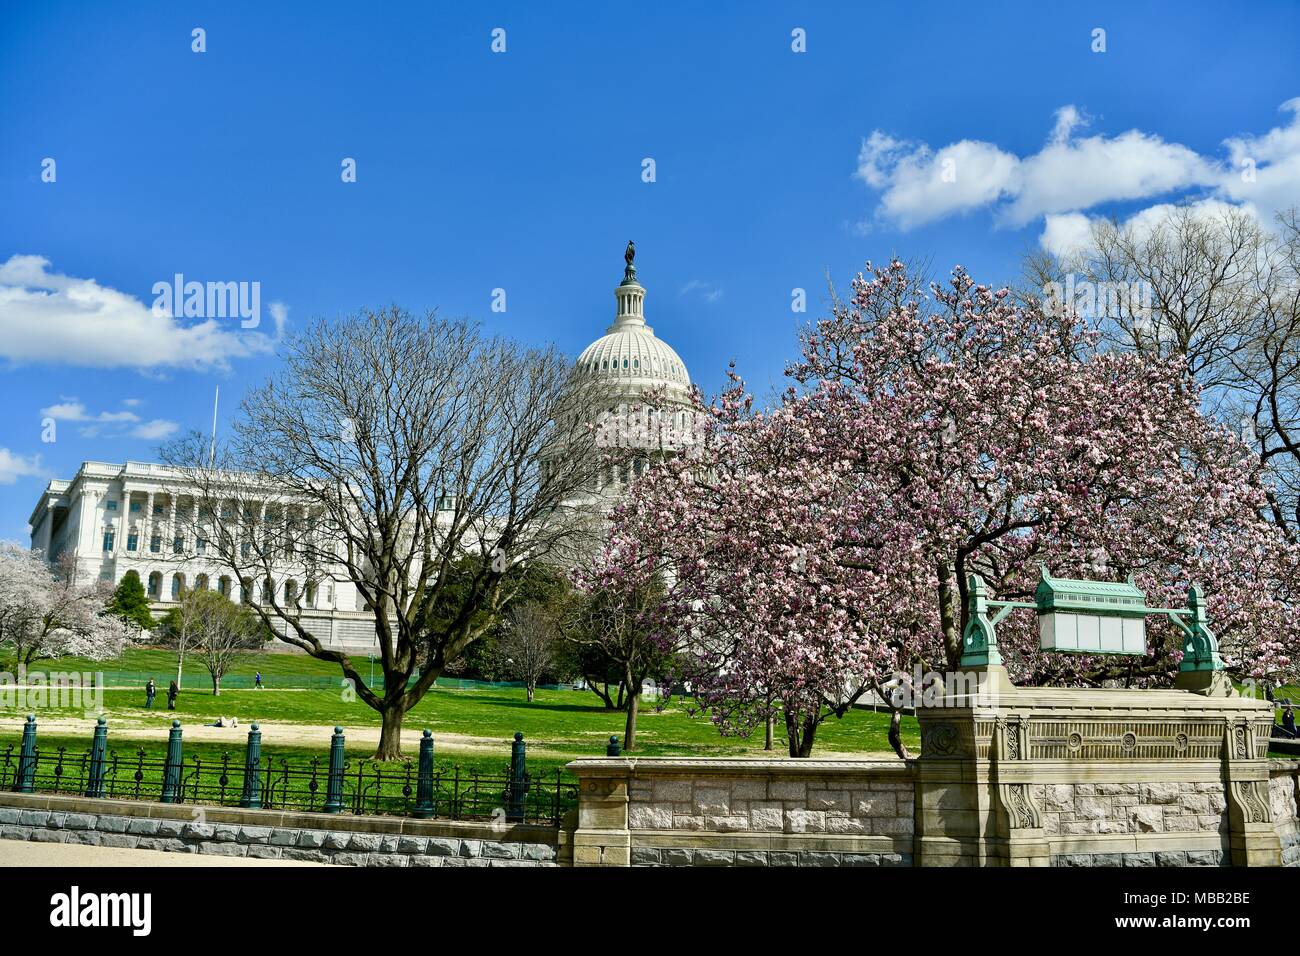 United States Capitol Building During Early Spring When The Cherry